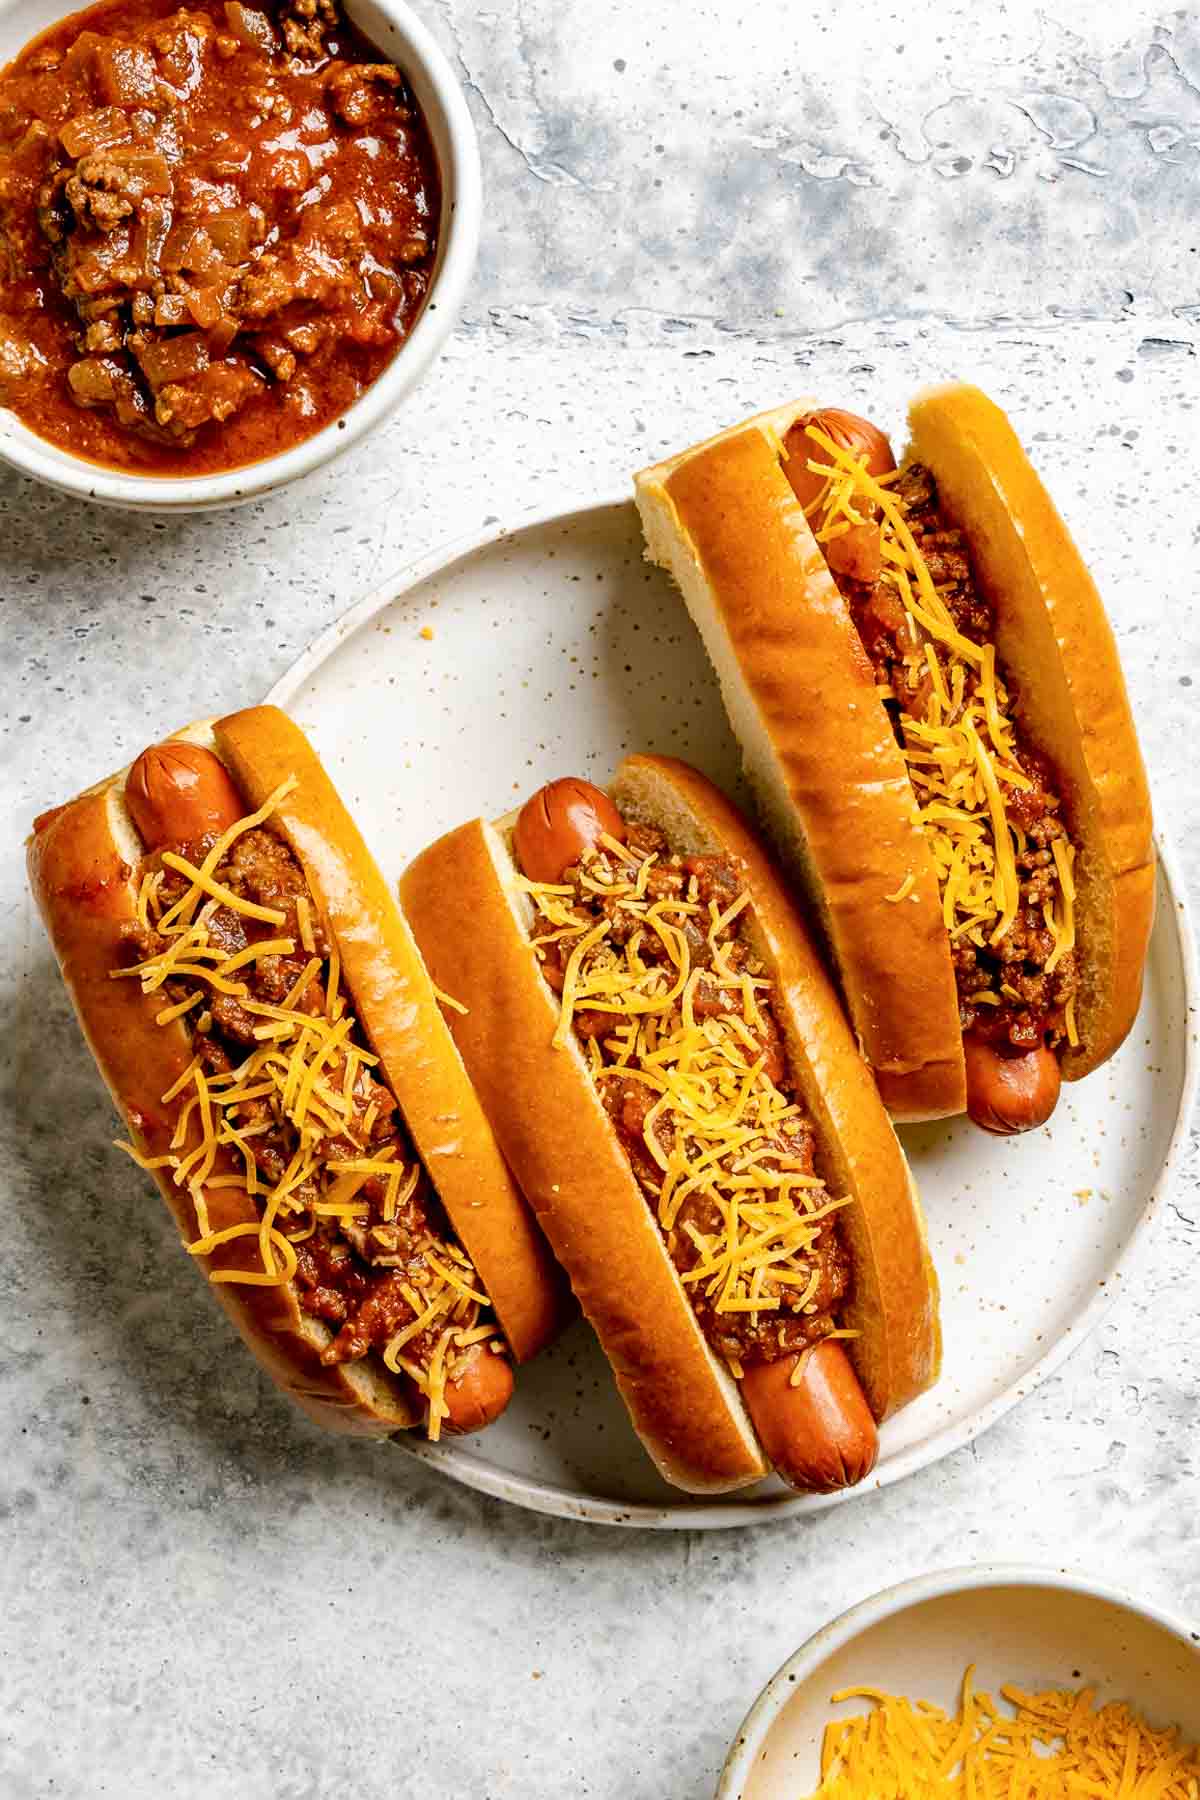 Homemade hot dog chili in a bowl and on hot dogs.